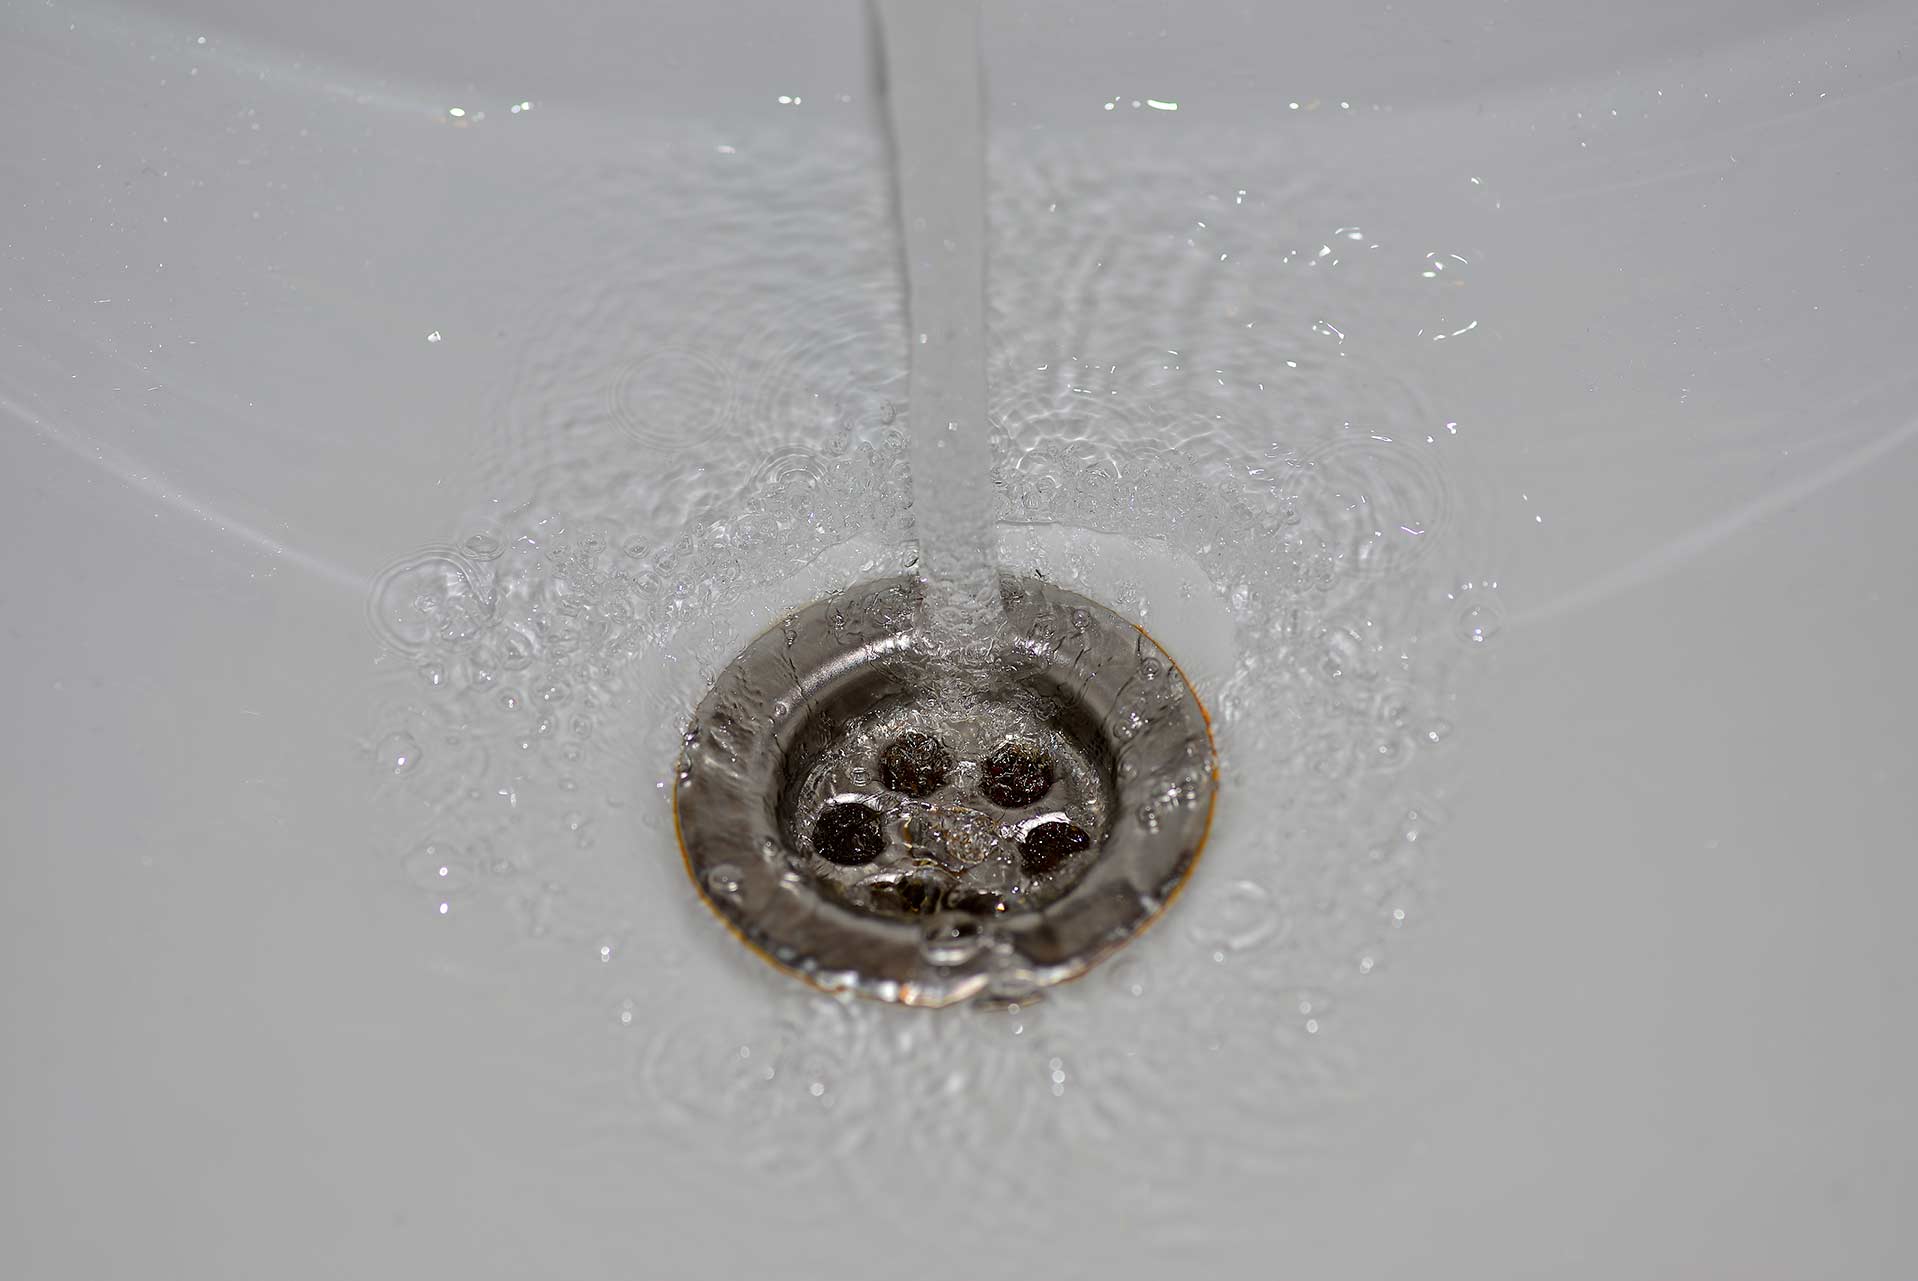 A2B Drains provides services to unblock blocked sinks and drains for properties in Herne Hill.